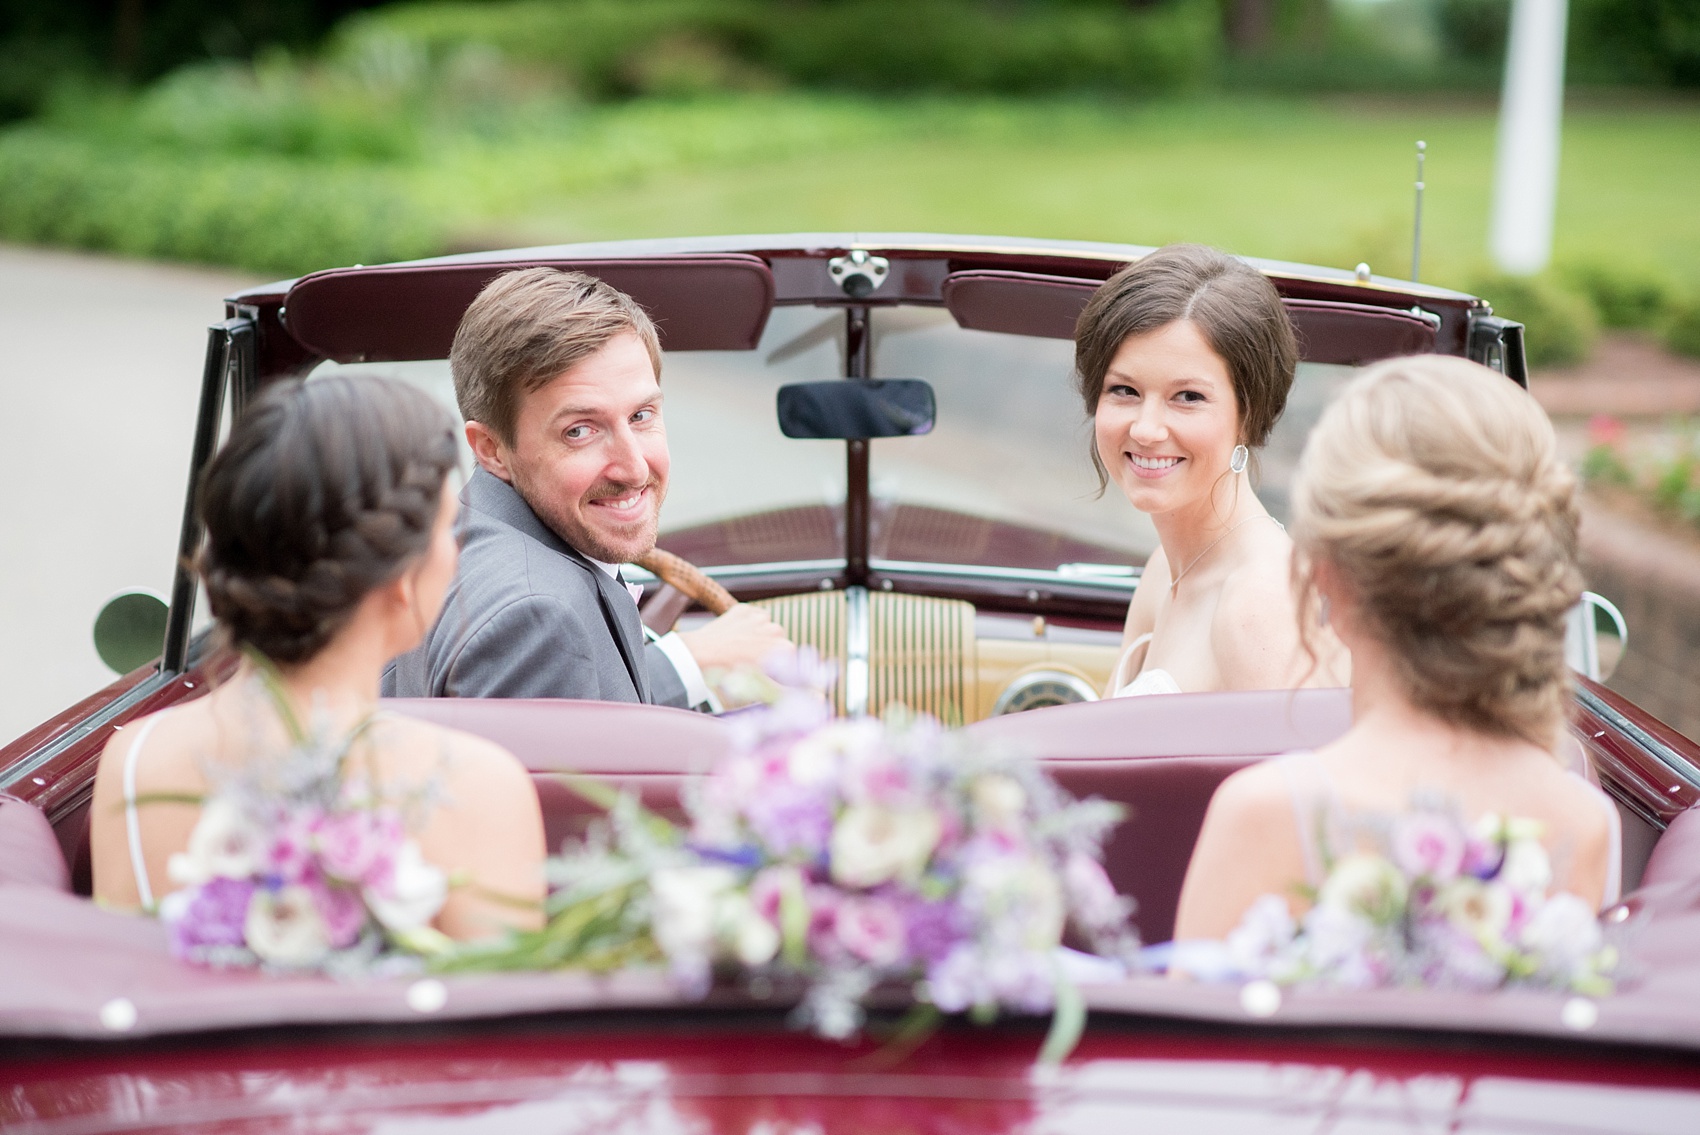 Mikkel Paige Photography images of a Rose Hill Plantation wedding inspiration. Photos of the wedding party in a vintage car.